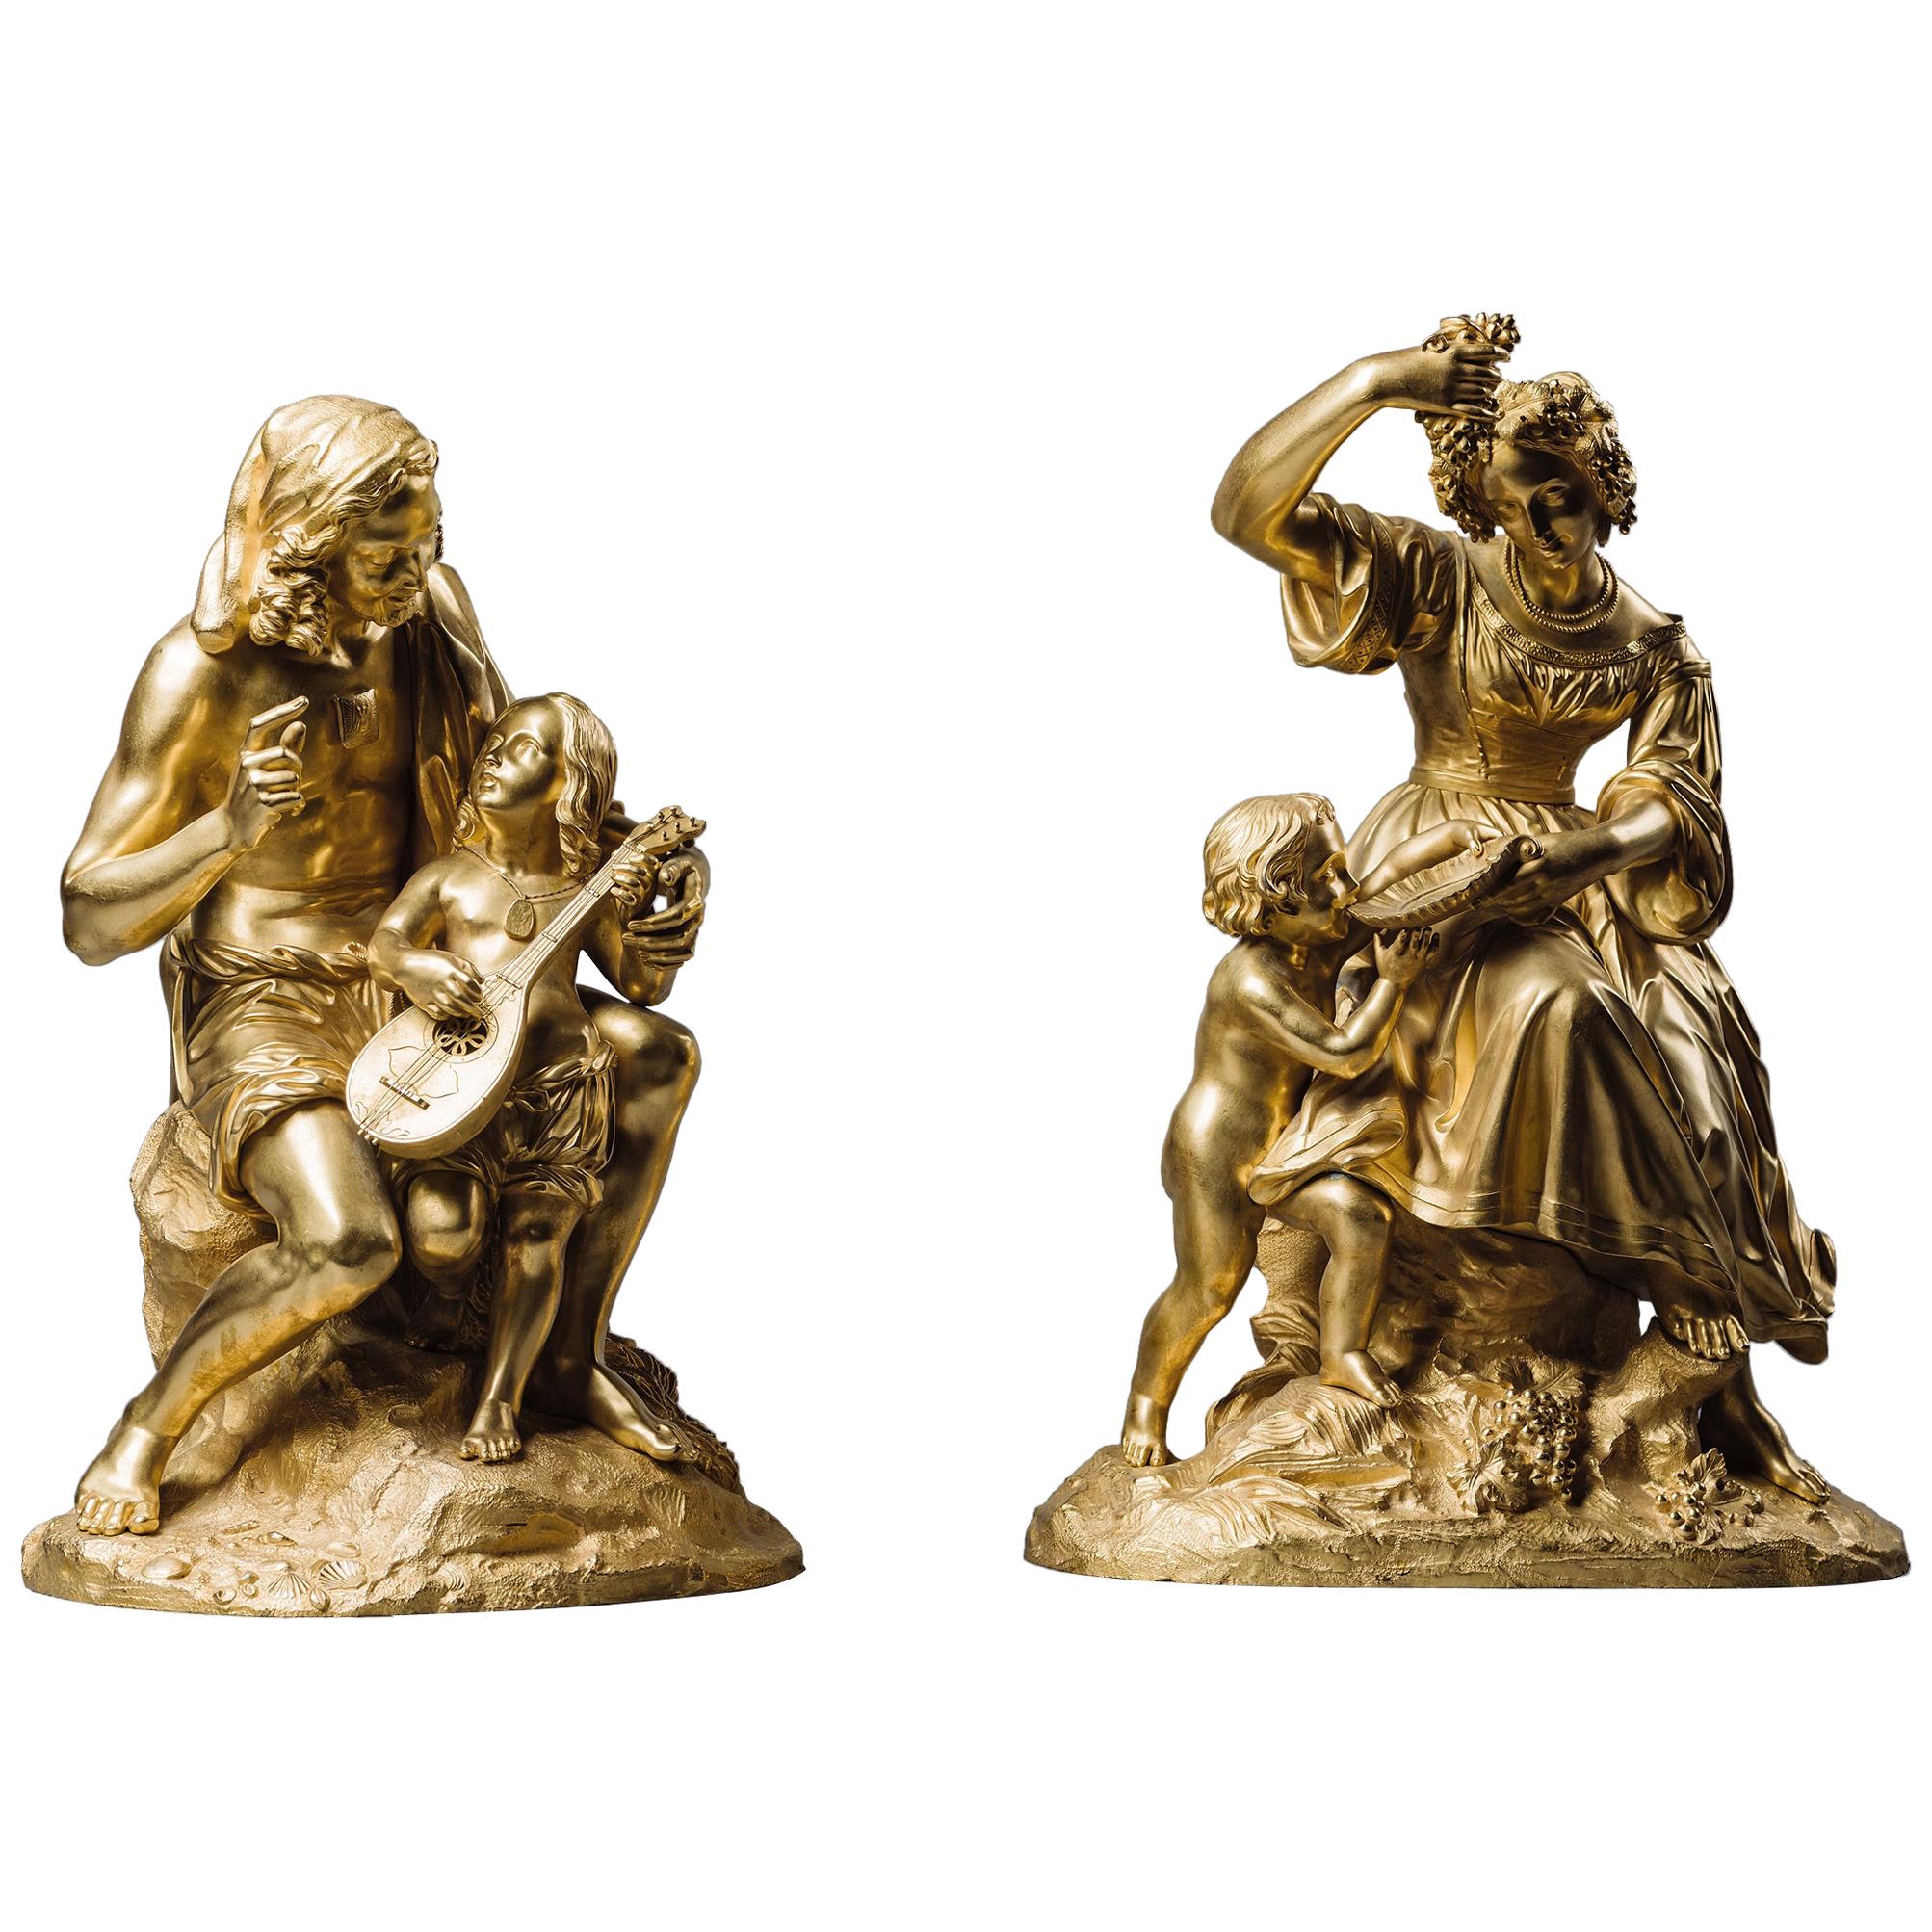 Pair of Restoration Period Gilt-Bronze Allegorical Groups. French, circa 1830 For Sale